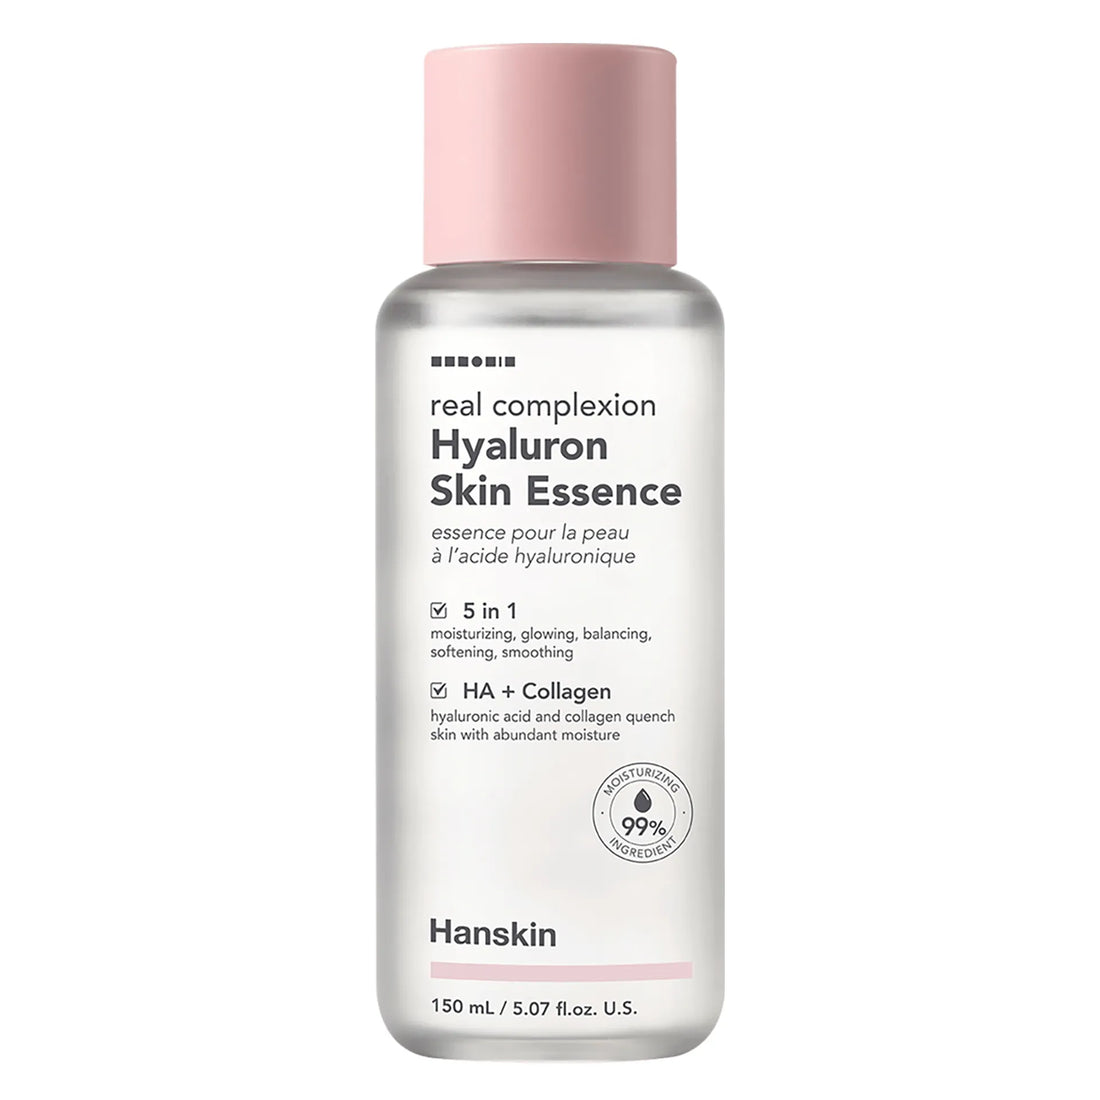 Real Complexion Hyaluron Skin Essence [150ml]